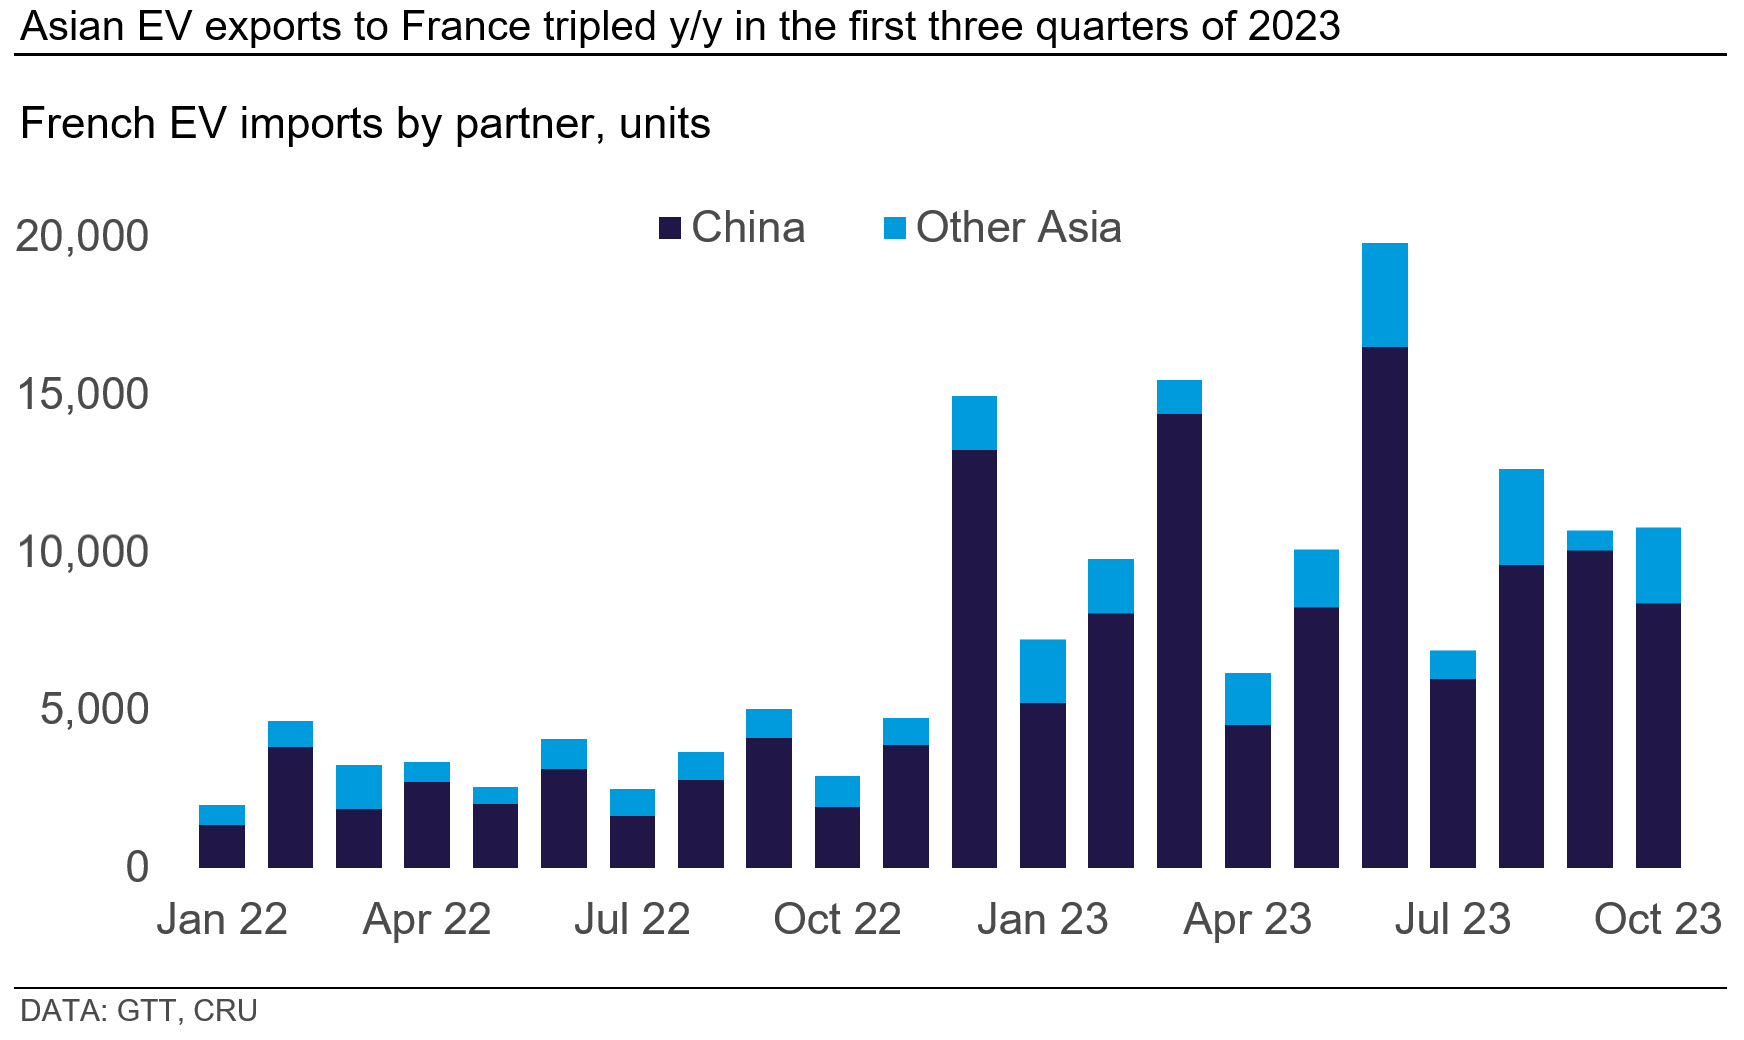 Graph showing how Asian EV exports to France tripled y/y in the first three quarters of 2023.